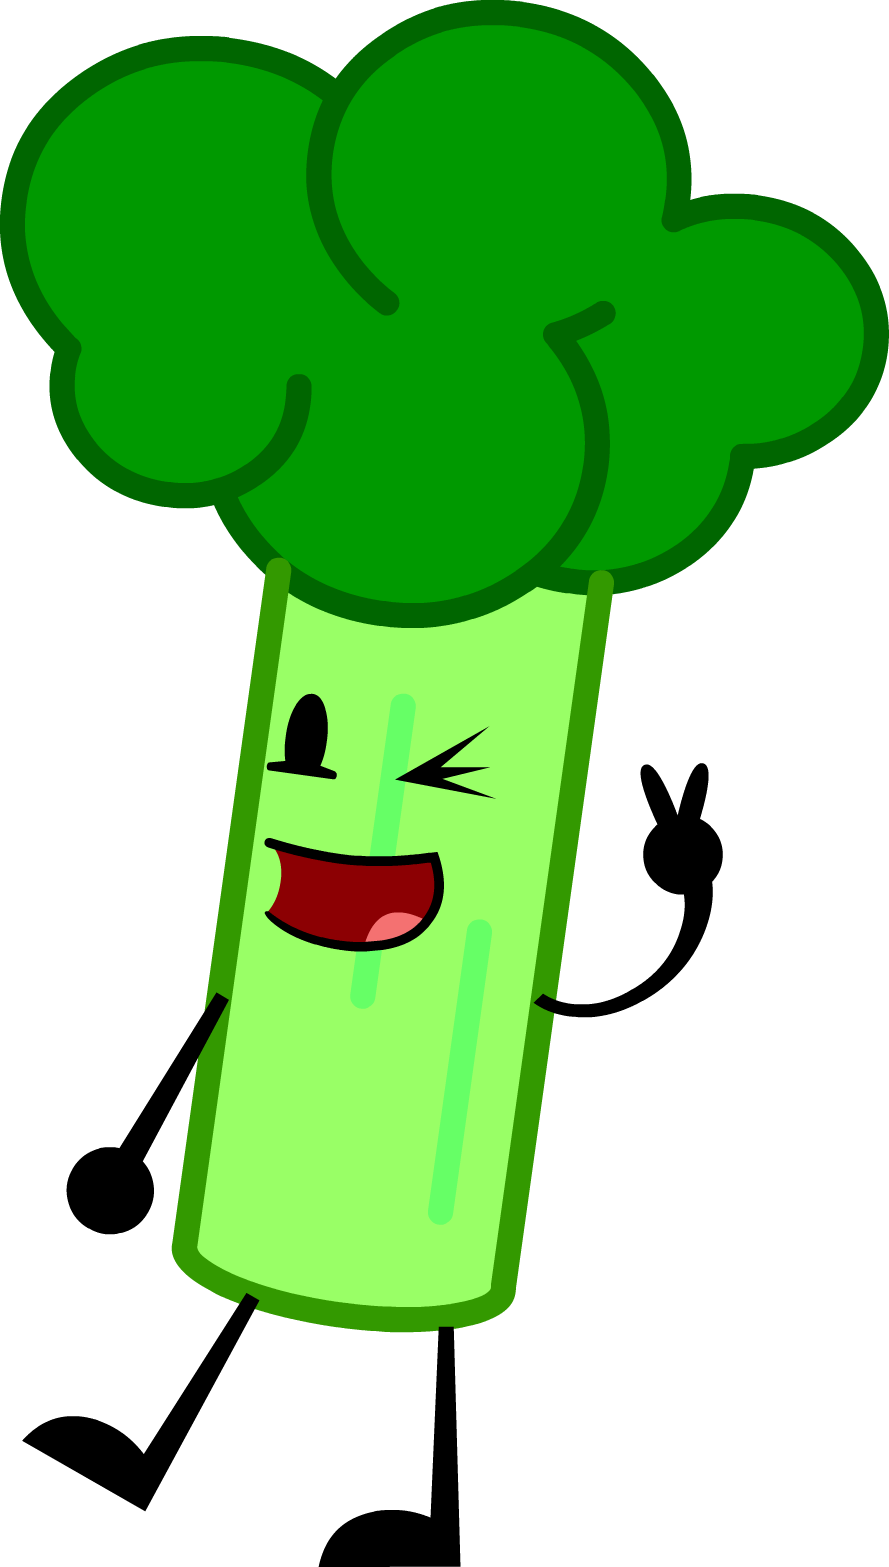 Spinach By Kitkatyj - Spinach Cartoon Png (889x1567)